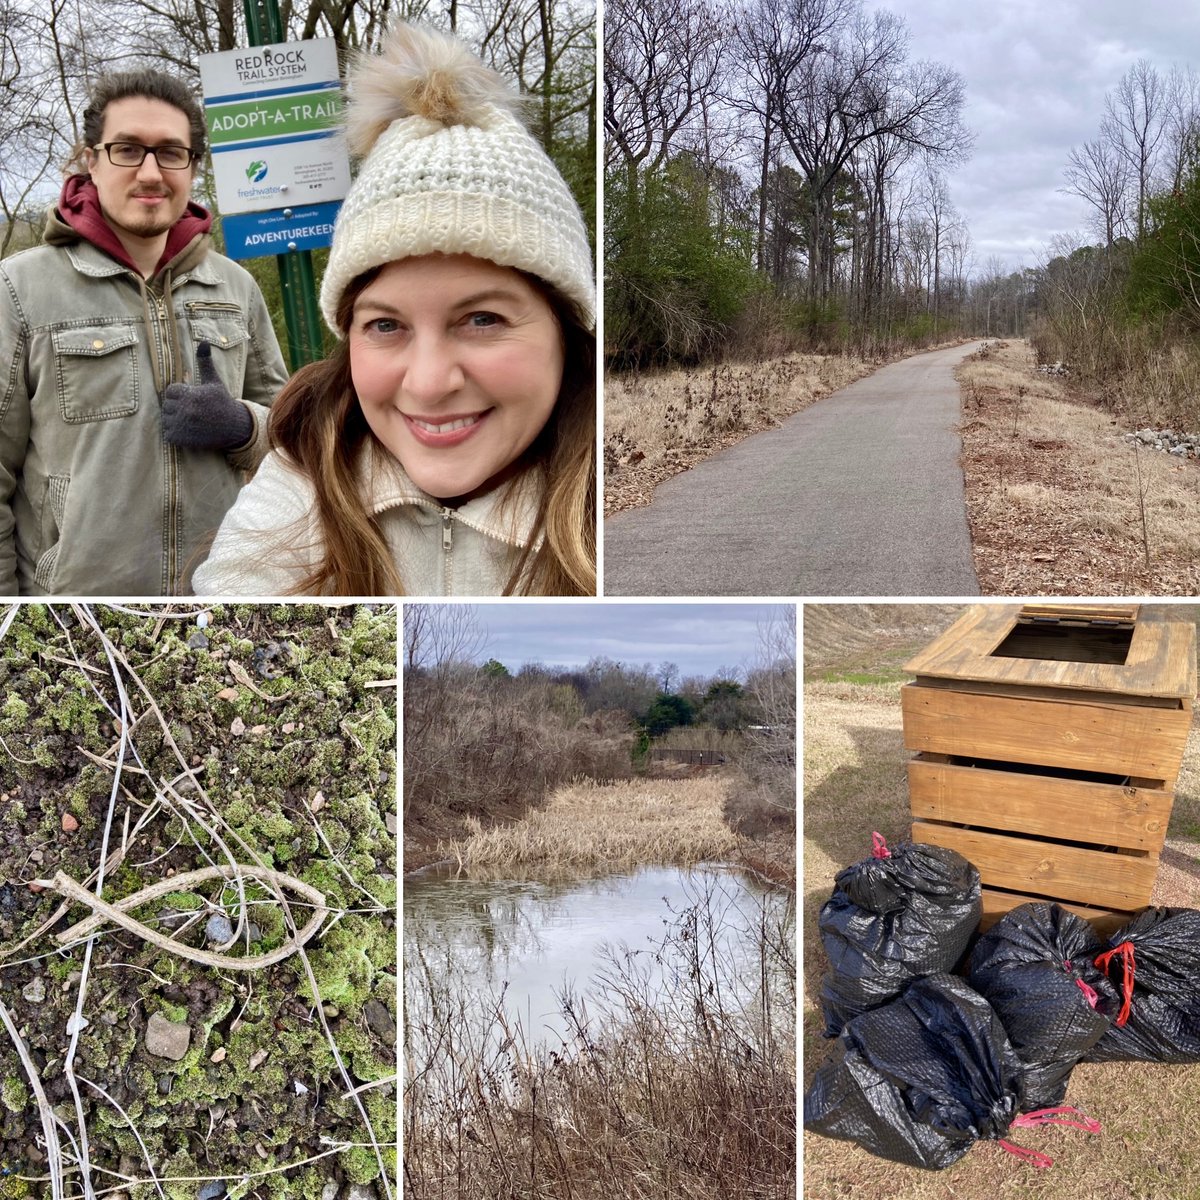 Associates from @AdventureKEEN took advantage of a slight uptick in temperature to pick up trash on our adopted mile of the High Ore Line Trail. We enjoy assisting the @FreshwaterLT in the effort to #KeepAlabamaBeautiful! #bewellbeoutdoors